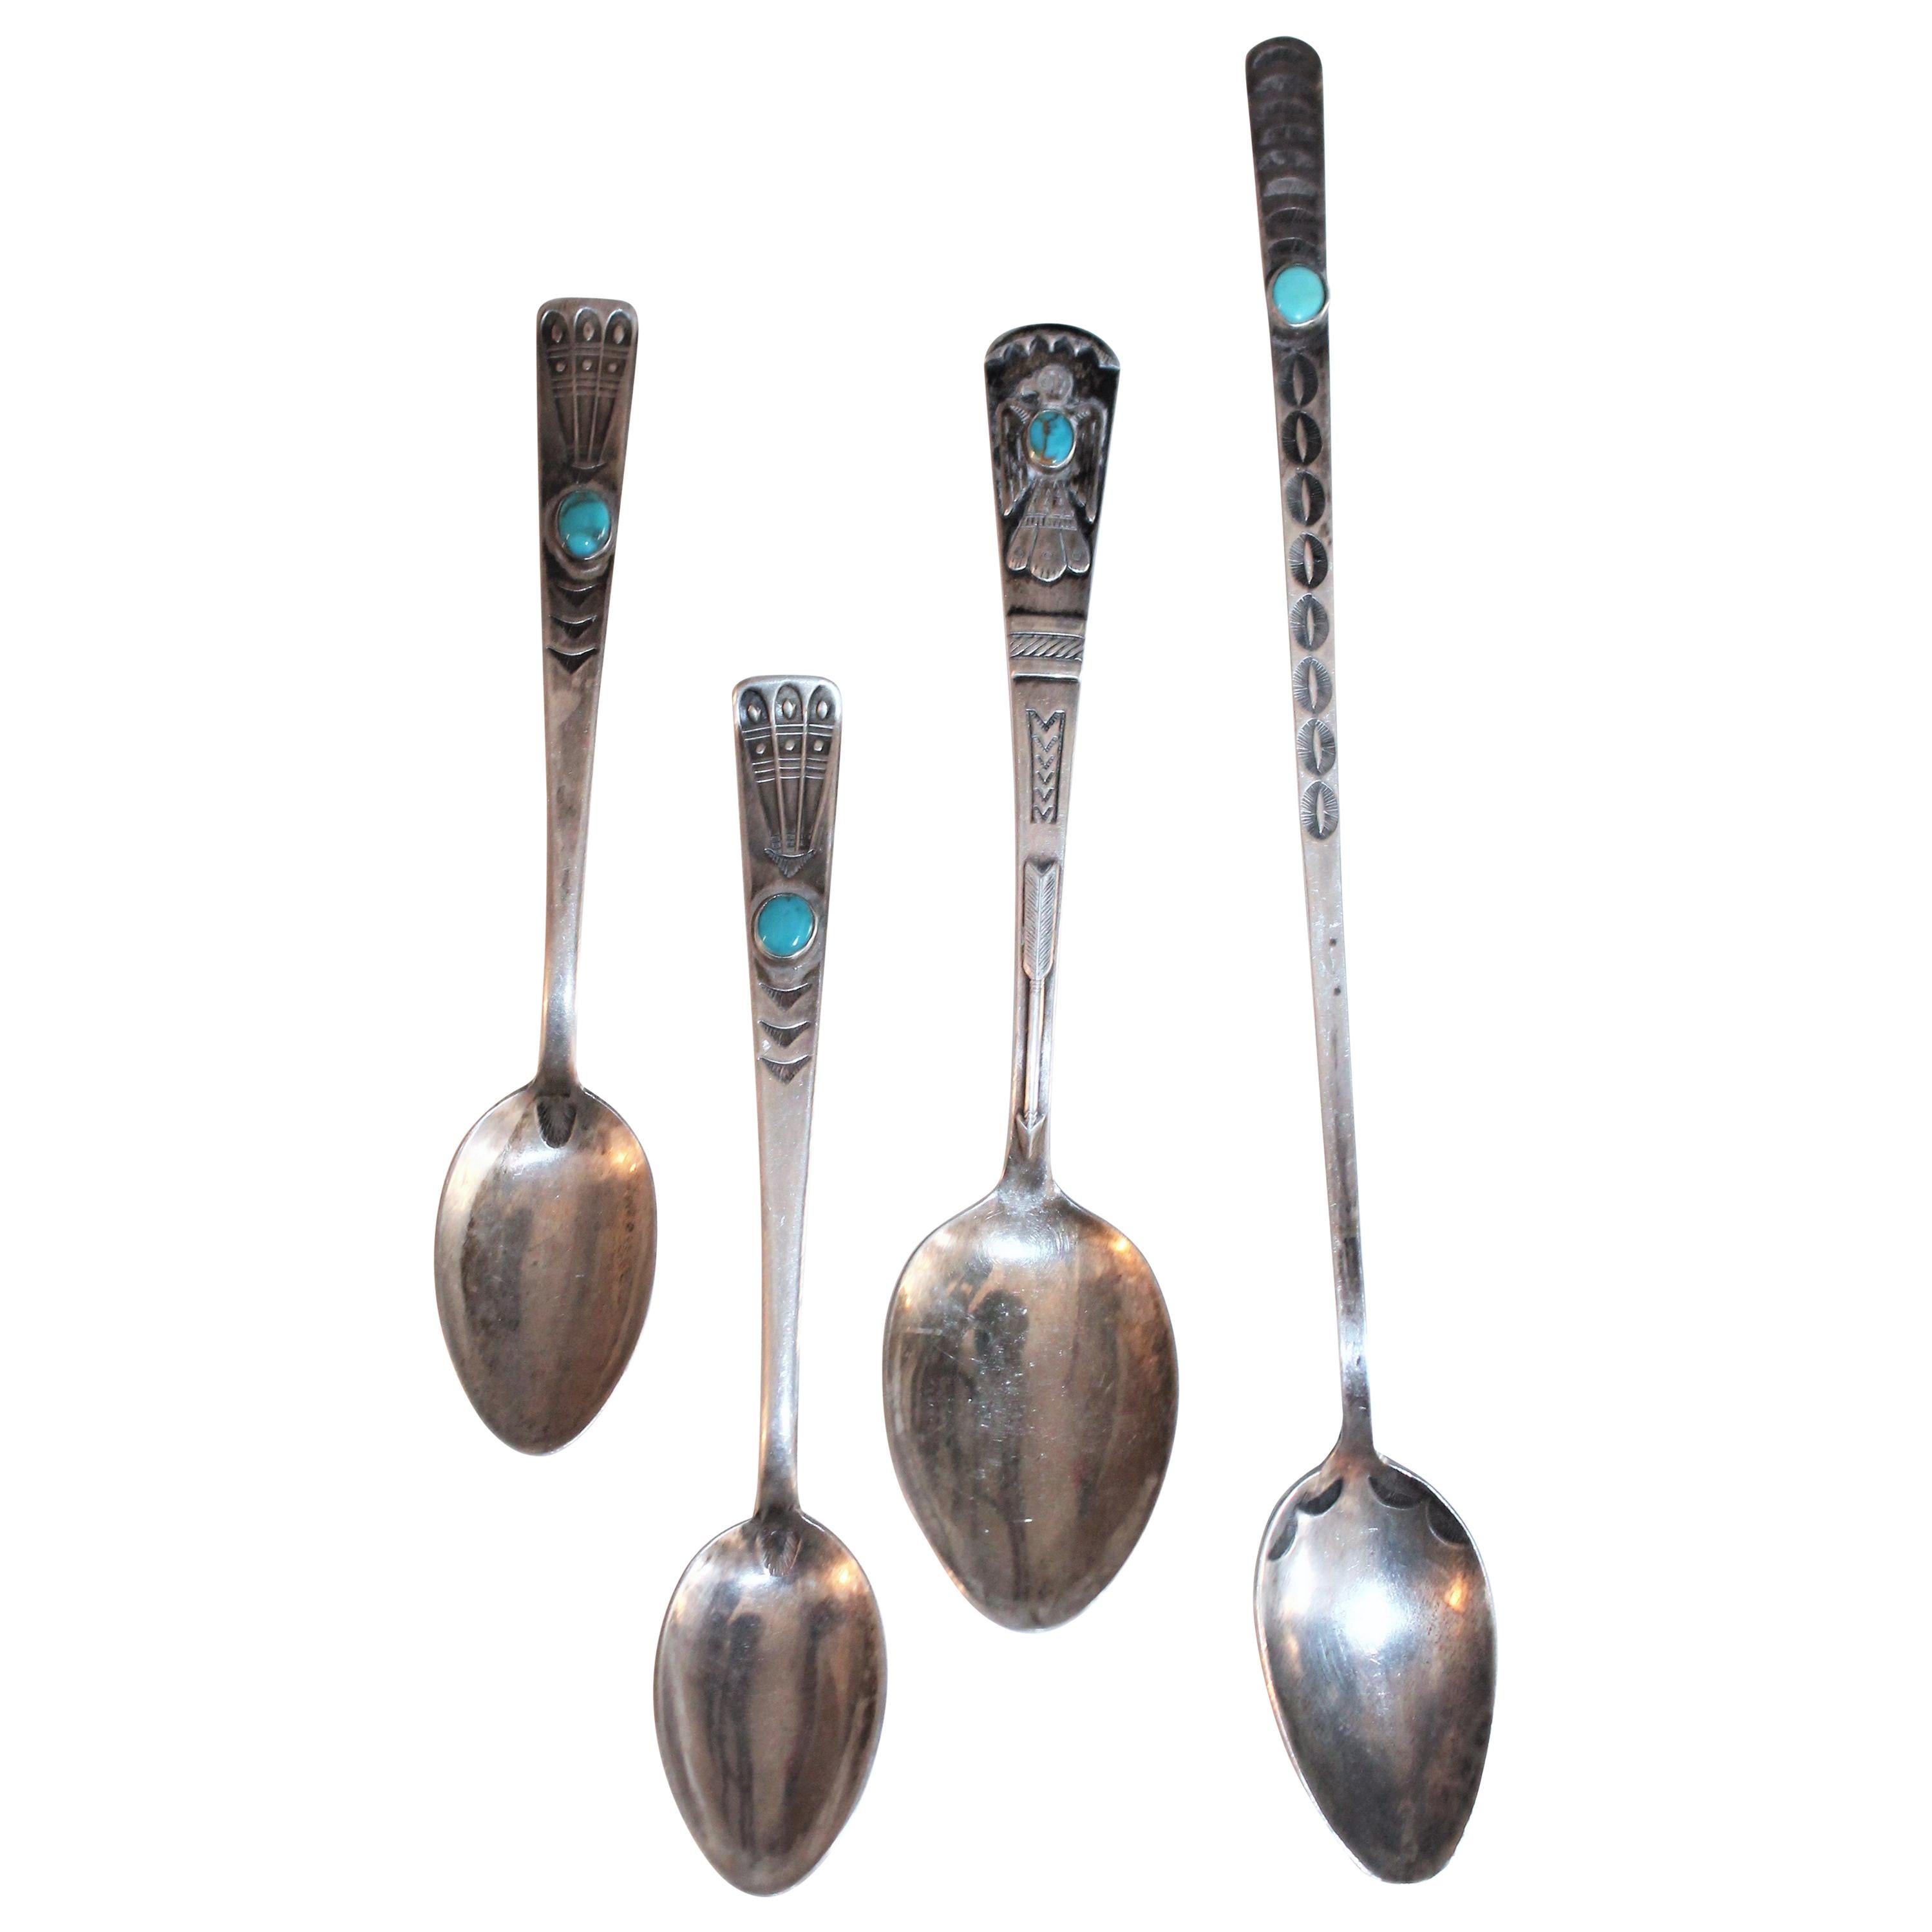 Navajo Indian Silver Spoons with Turquoise